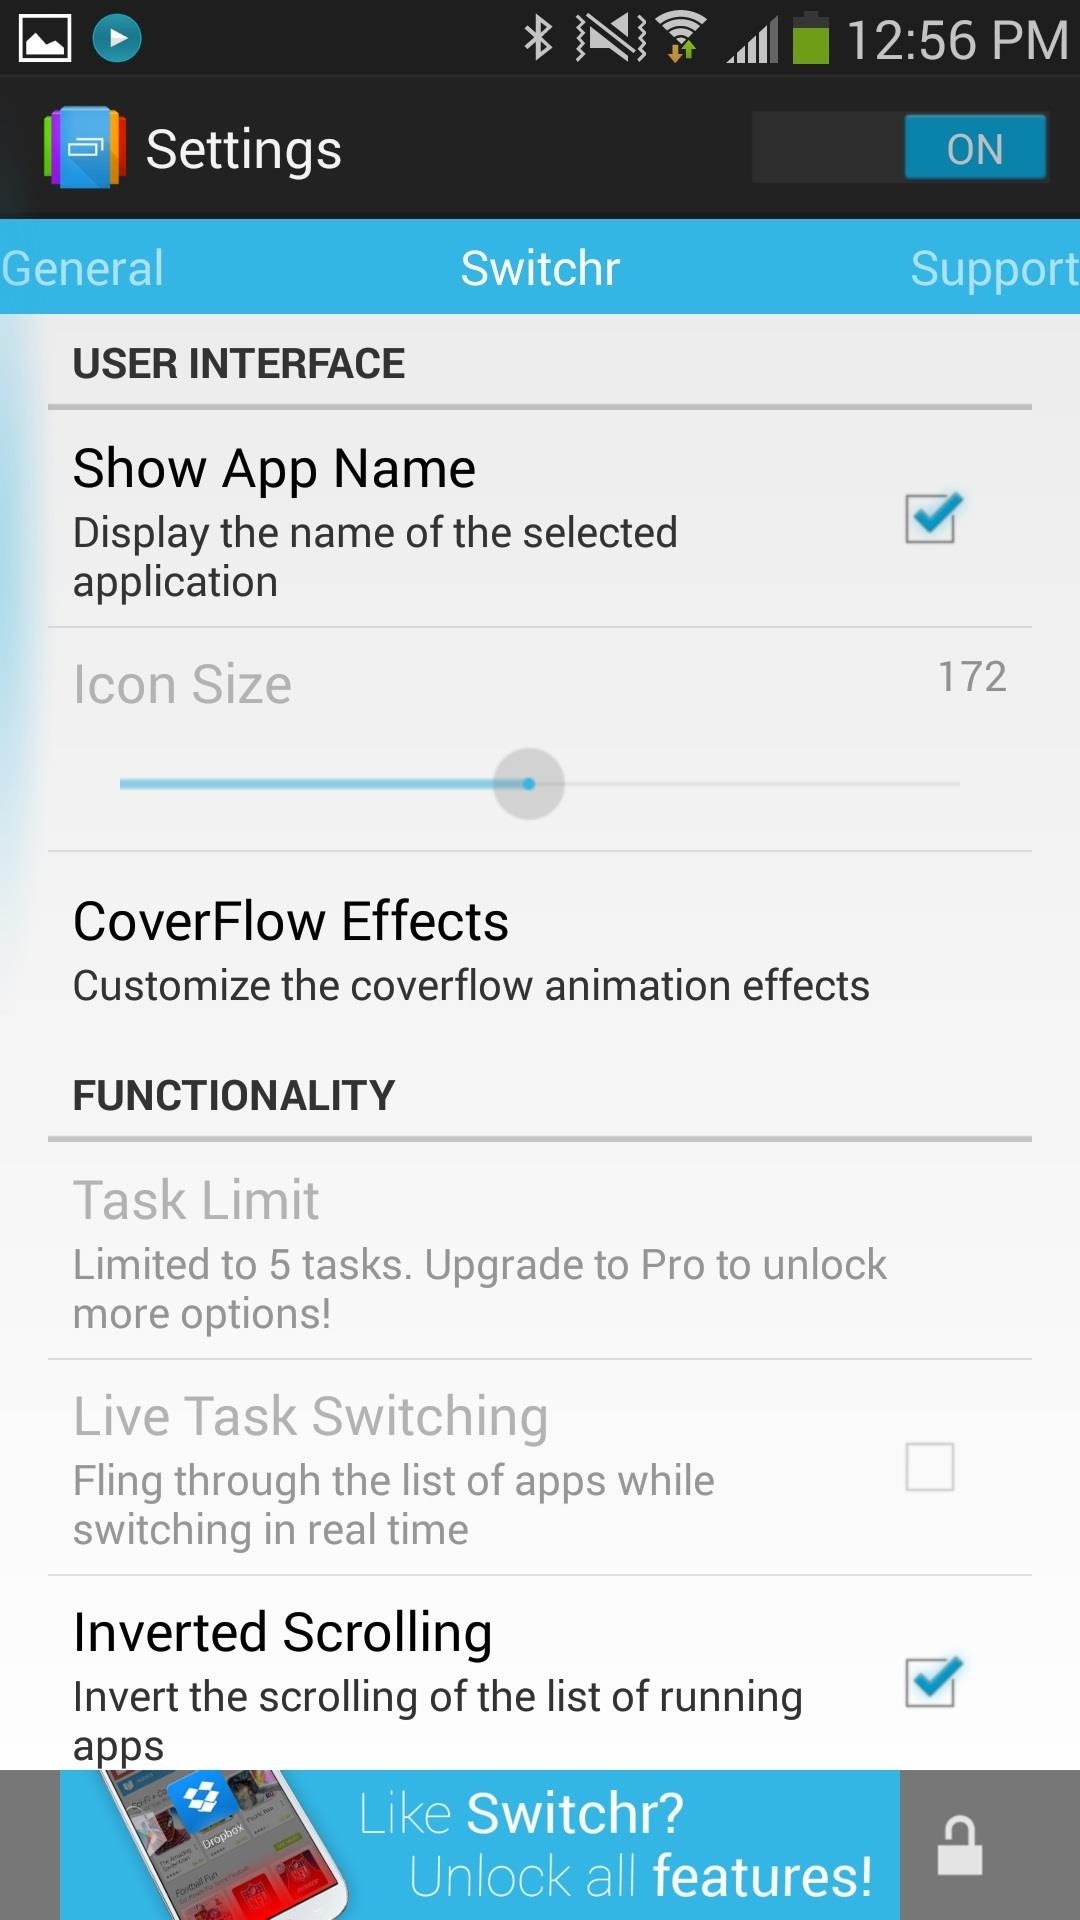 How to Switch Between Running Apps & Games Faster on Your Samsung Galaxy Note 3